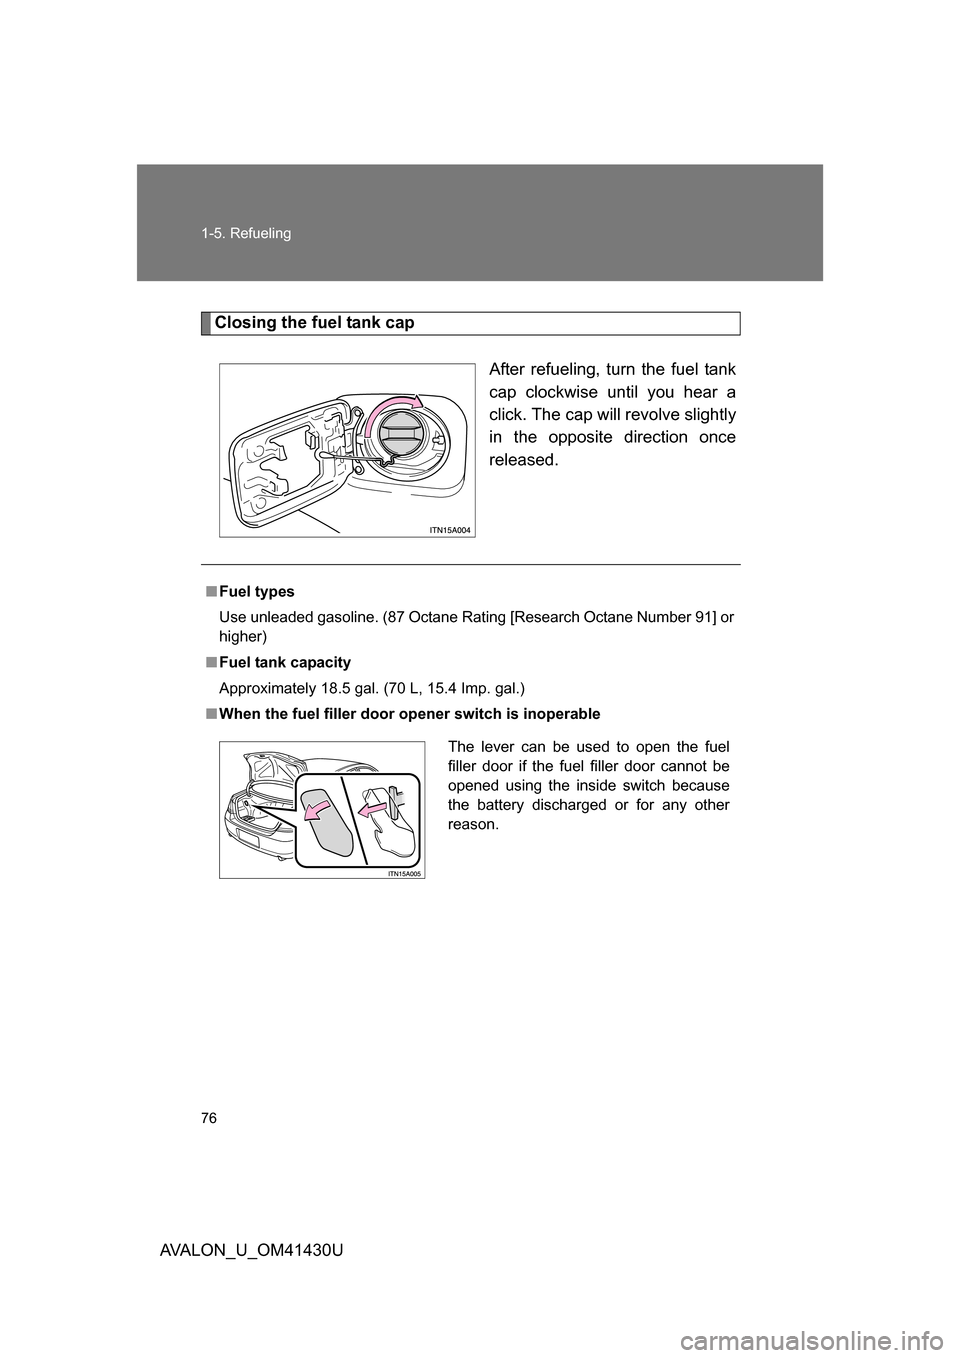 TOYOTA AVALON 2009 XX30 / 3.G Manual PDF 76 1-5. Refueling
AVALON_U_OM41430U
Closing the fuel tank capAfter refueling, turn the fuel tank
cap clockwise until you hear a
click. The cap will revolve slightly
in the opposite direction once
rele